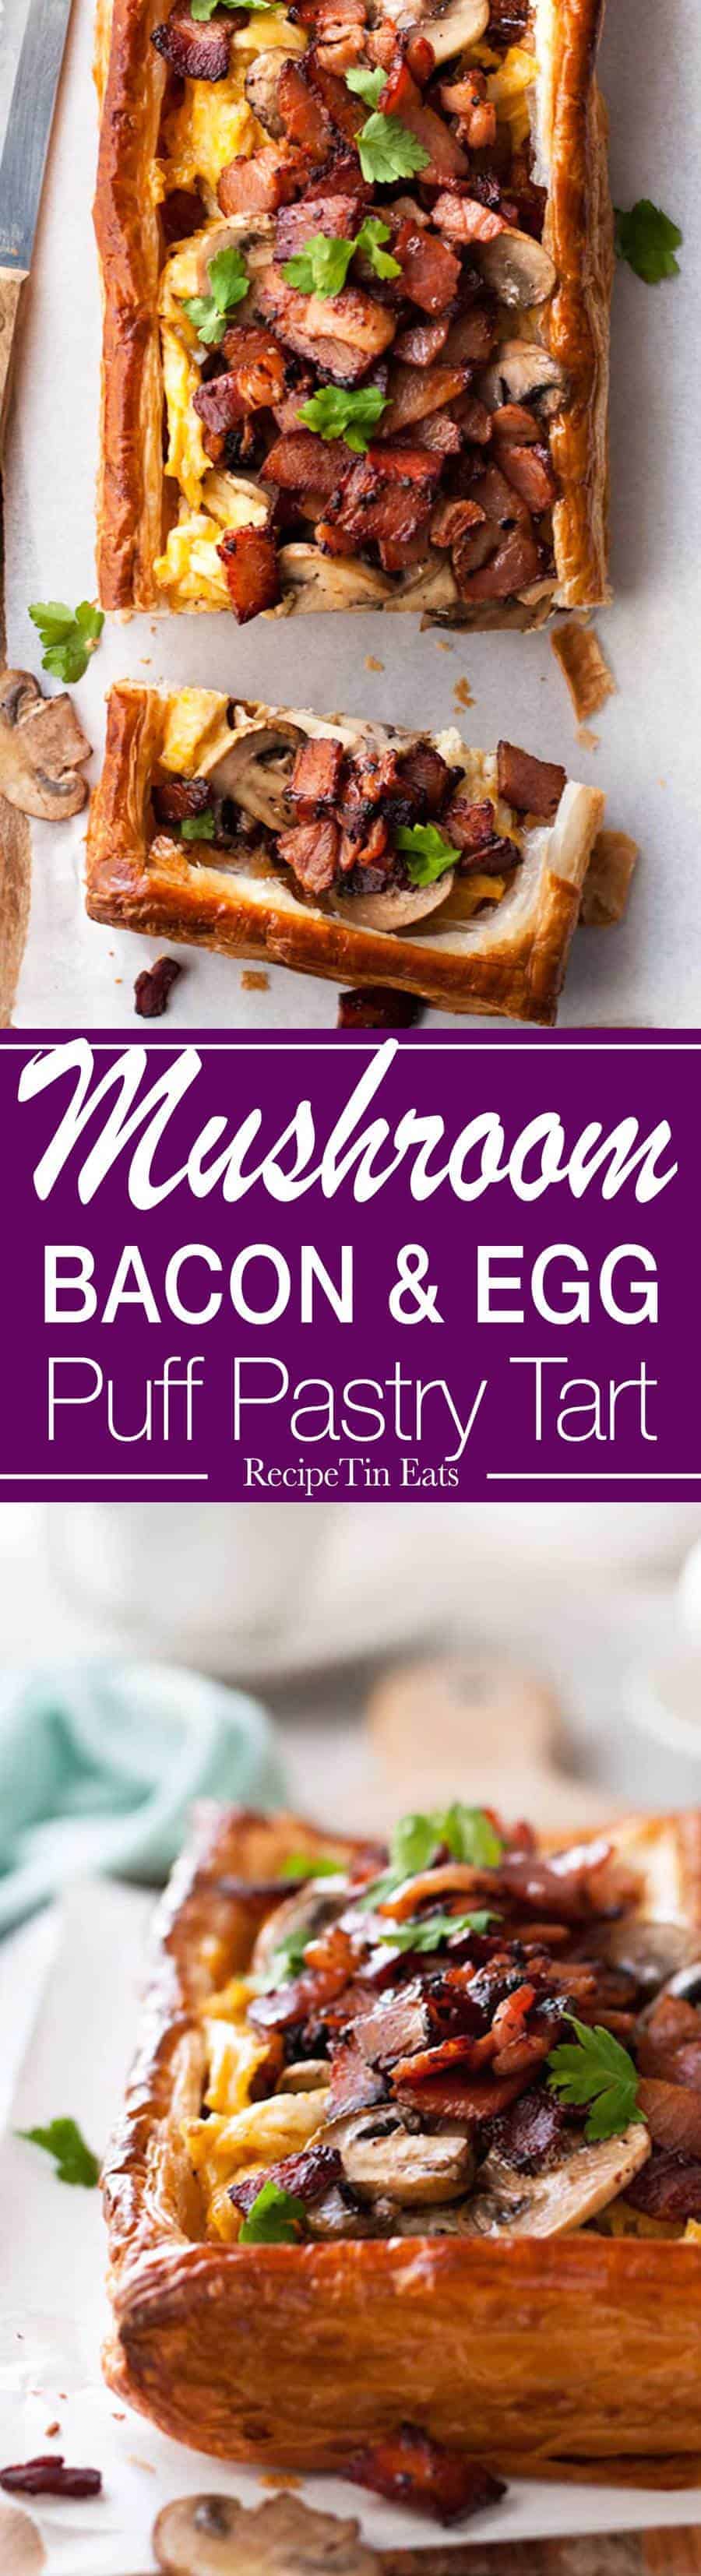 Mushroom Bacon Egg Puff Pastry Tart | This was a hit at brunch last weekend :)